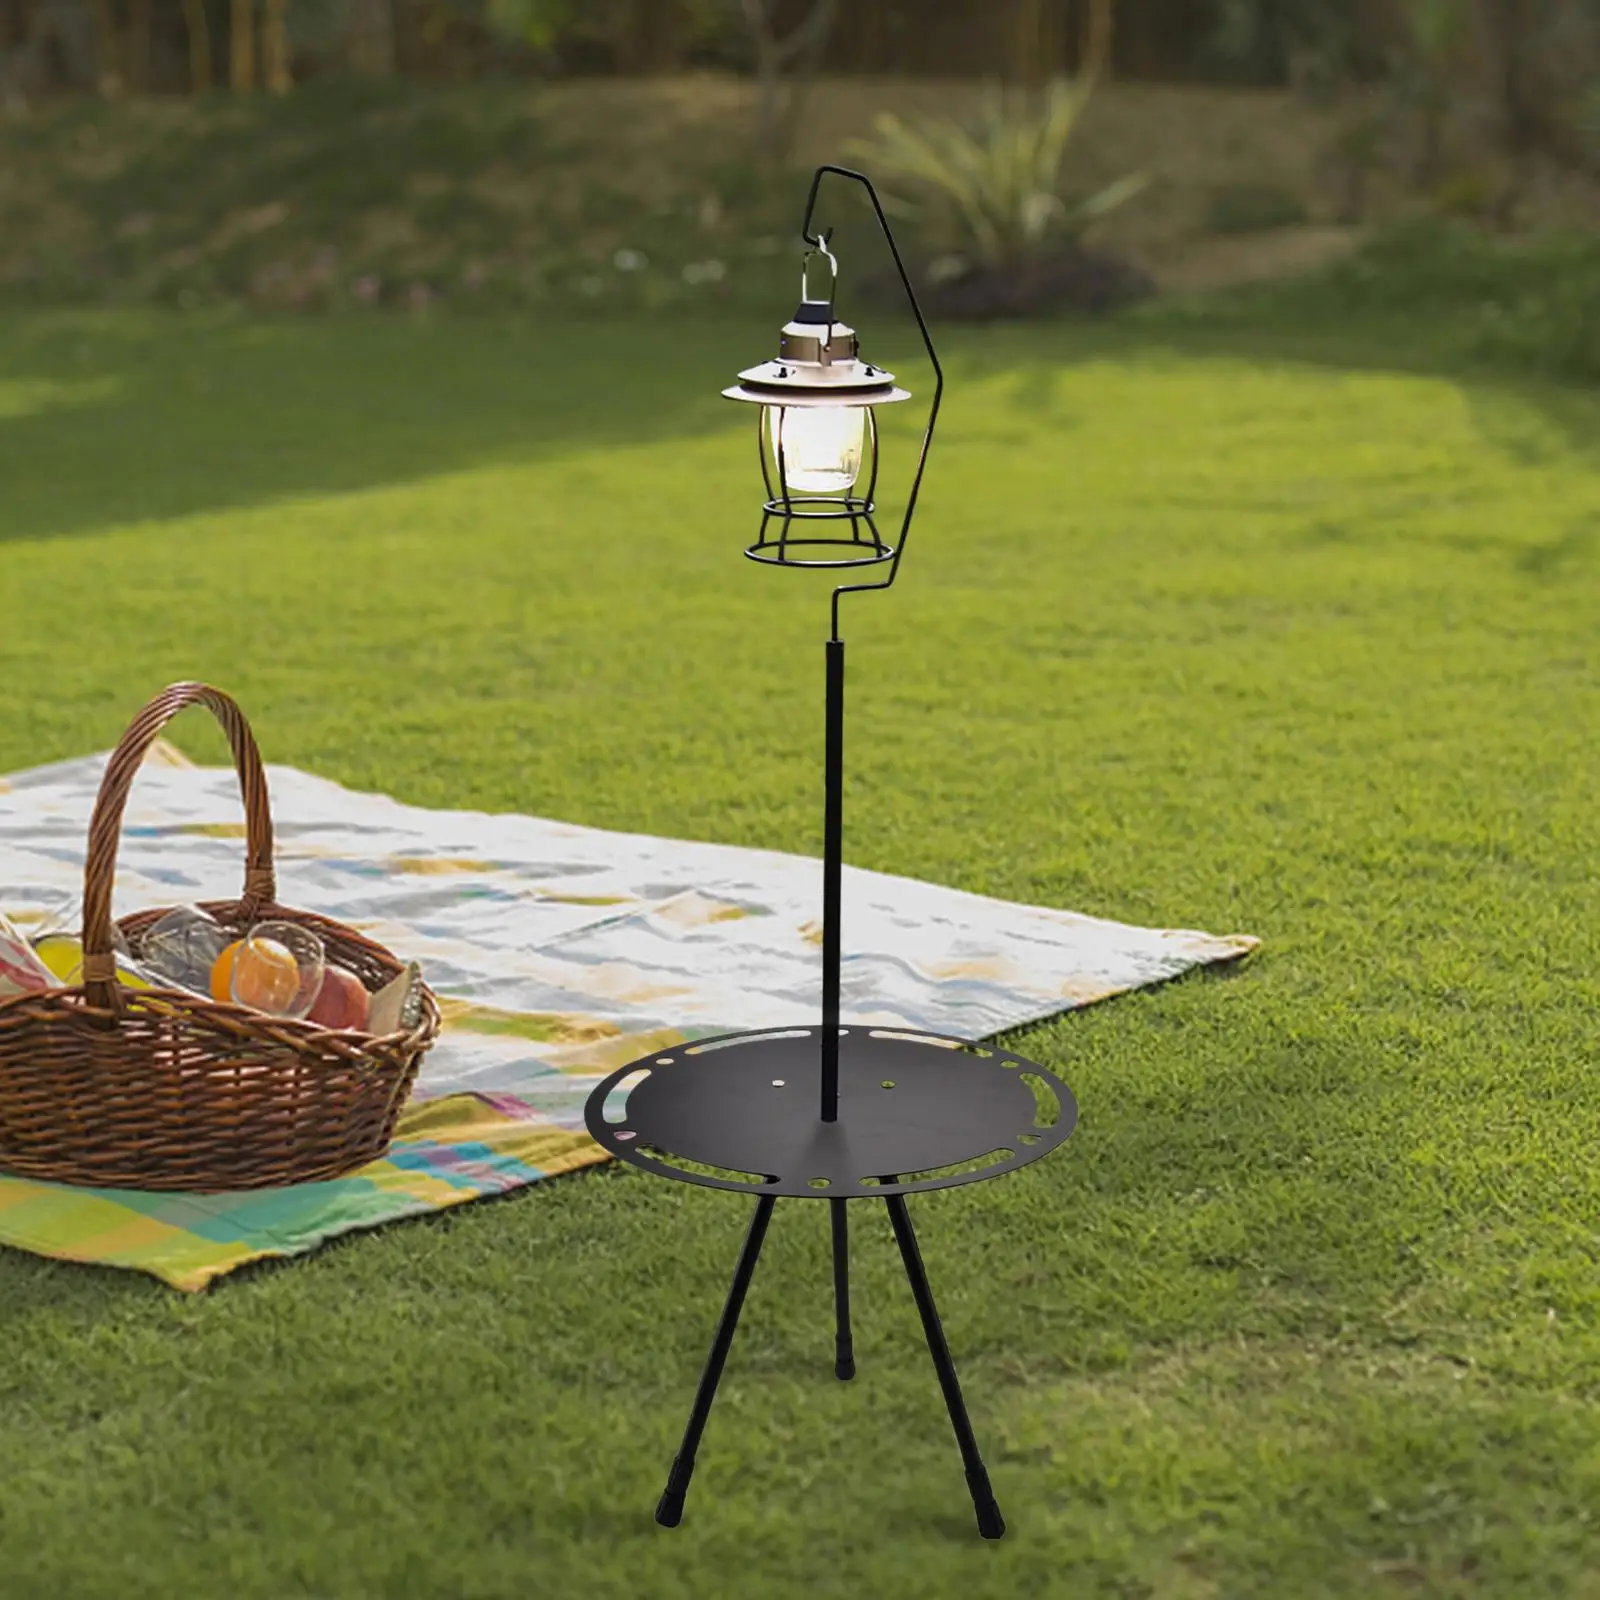 Portable Table Foldable Small Round Table with Lantern Holder Camping Side Table for Picnic Patio Outdoor Equipment